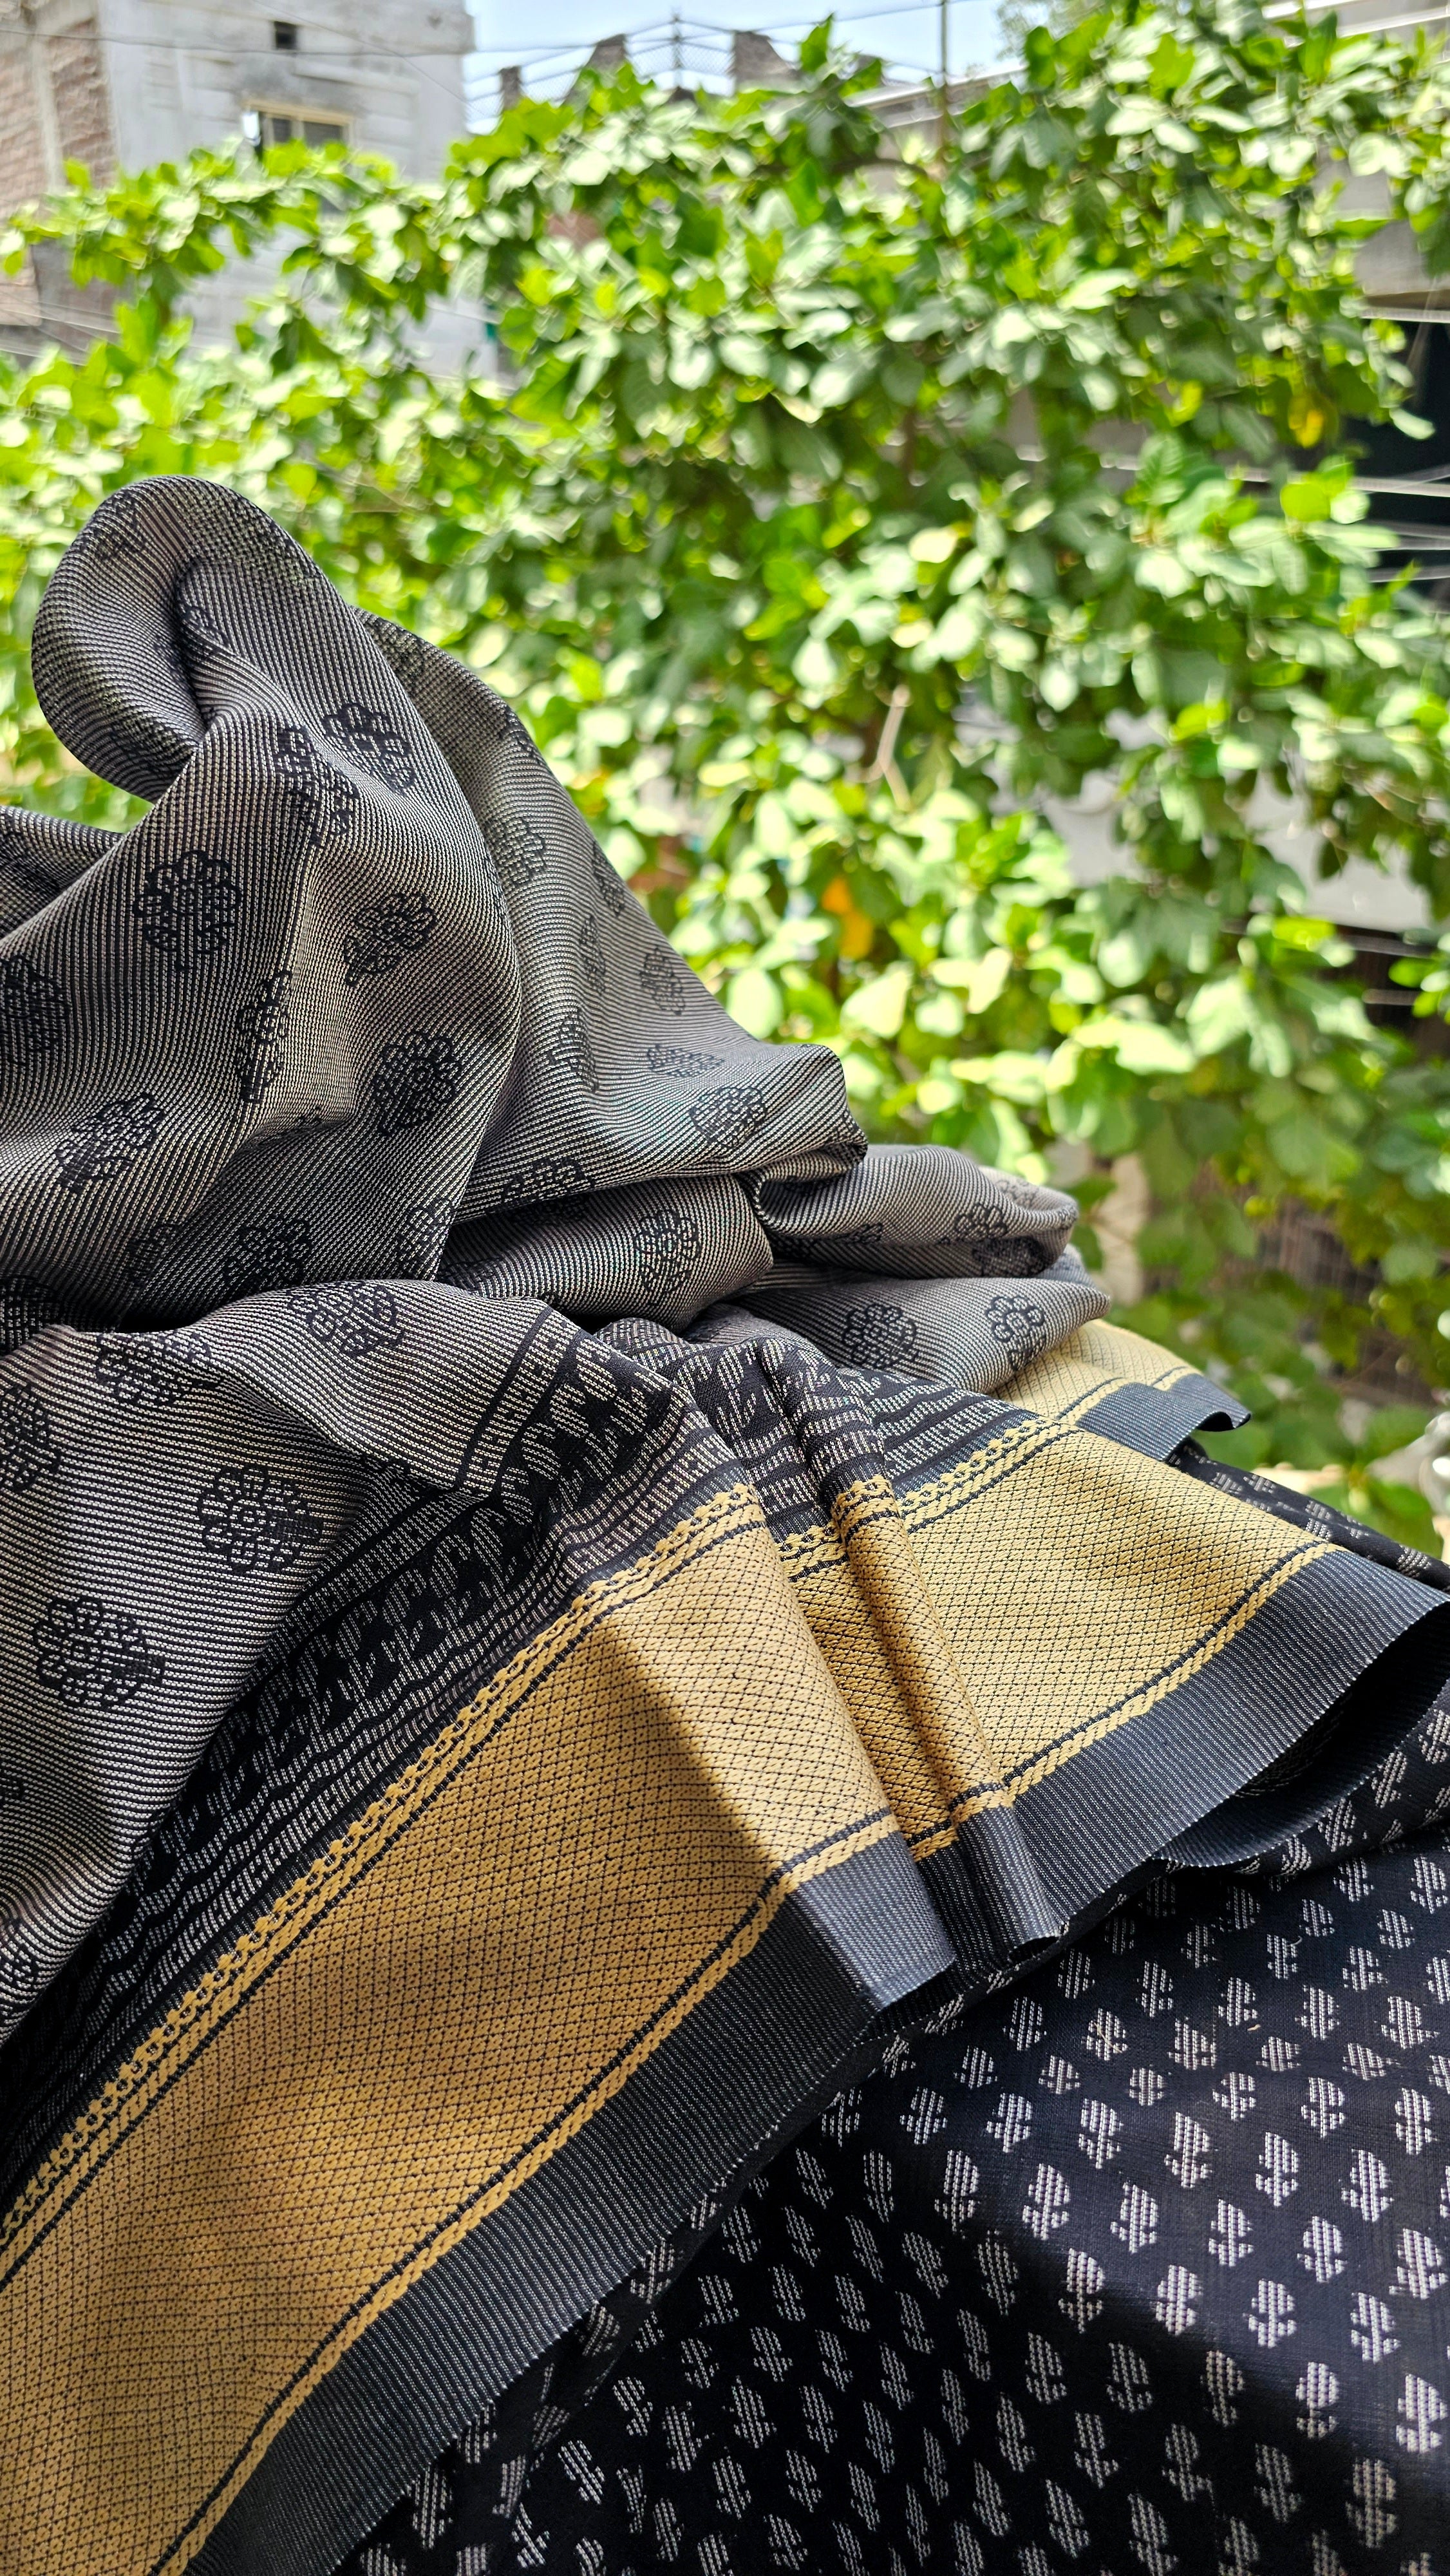 1×1 Weft Stripe Saree with Pale Yellow thread Chatai Borders and Bagh Prints.